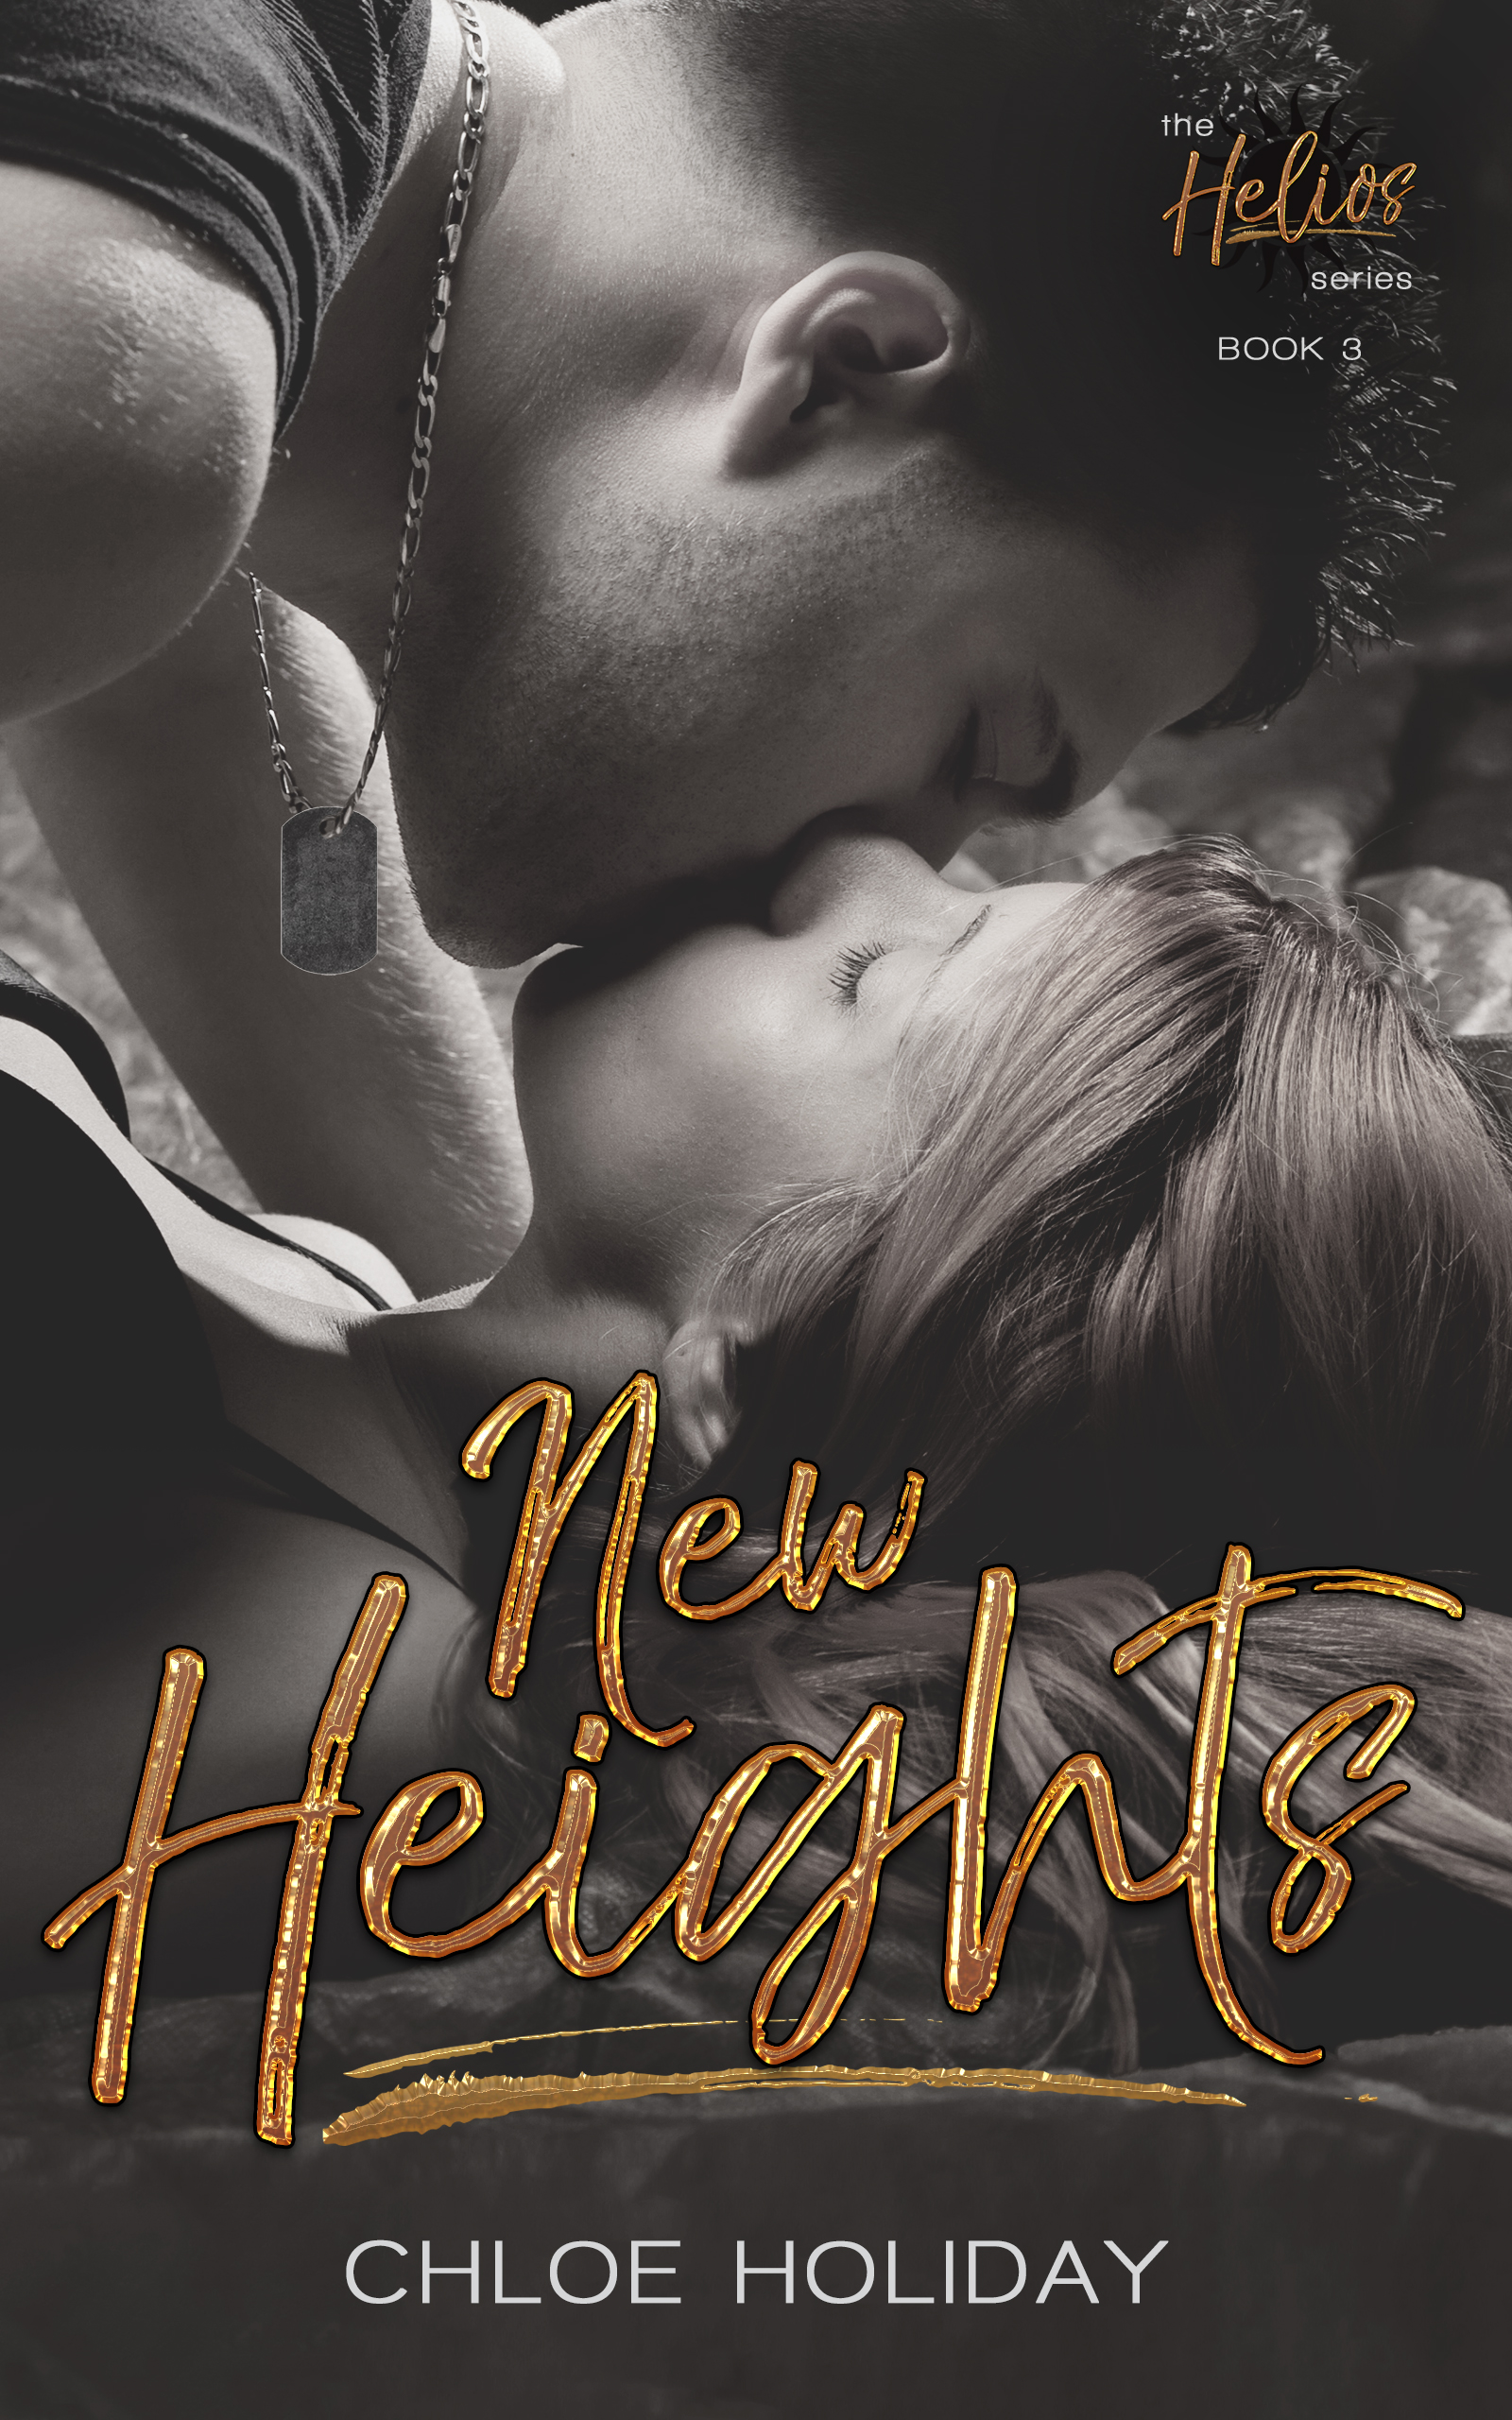 Listen to Chloe Holiday read about a rock climbing heroine and hot Navy hero in New Heights, on Indie Reads Aloud!